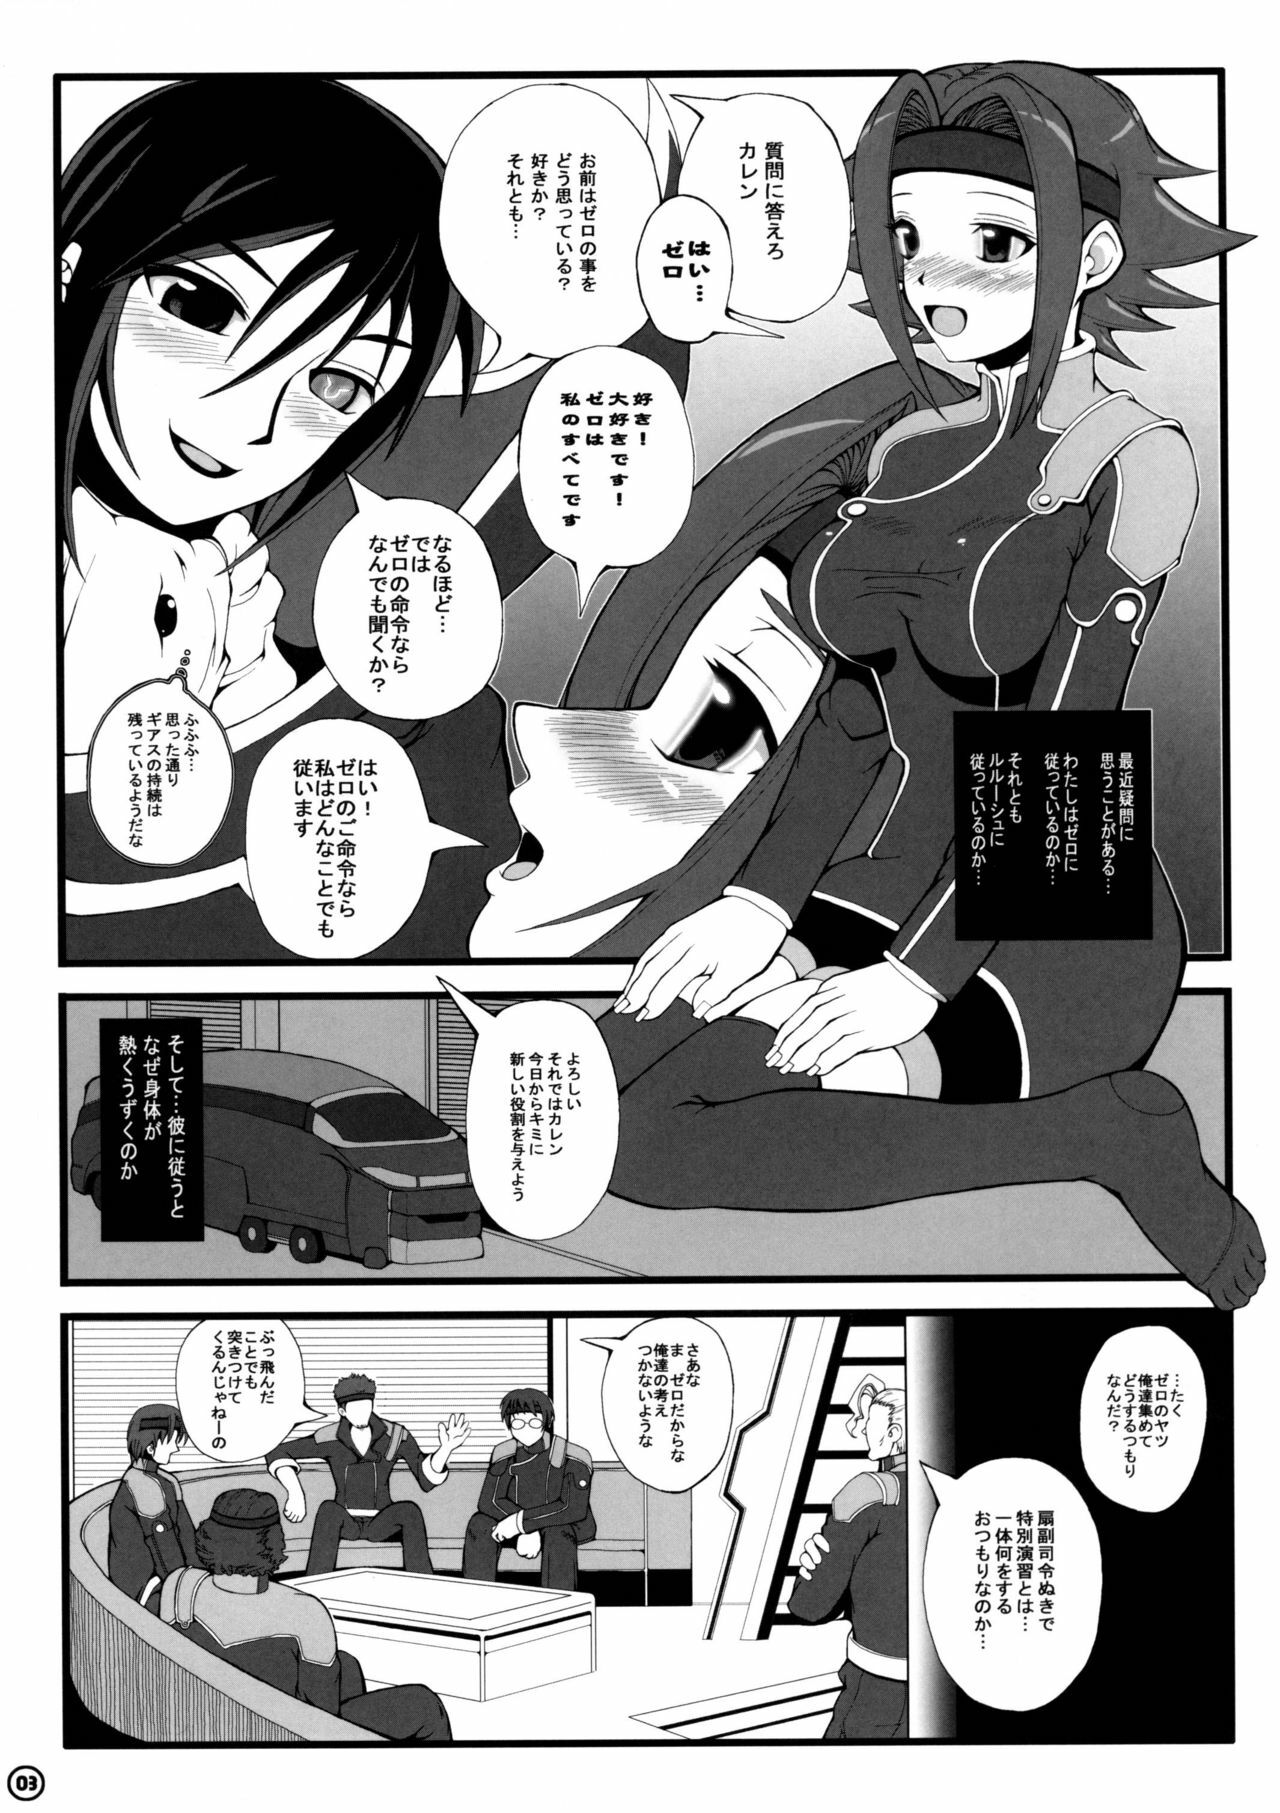 (C74) [Anklet-Girl (Tousei Oume)] ZERO-Meinu (Code Geass: Lelouch of the Rebellion) page 4 full